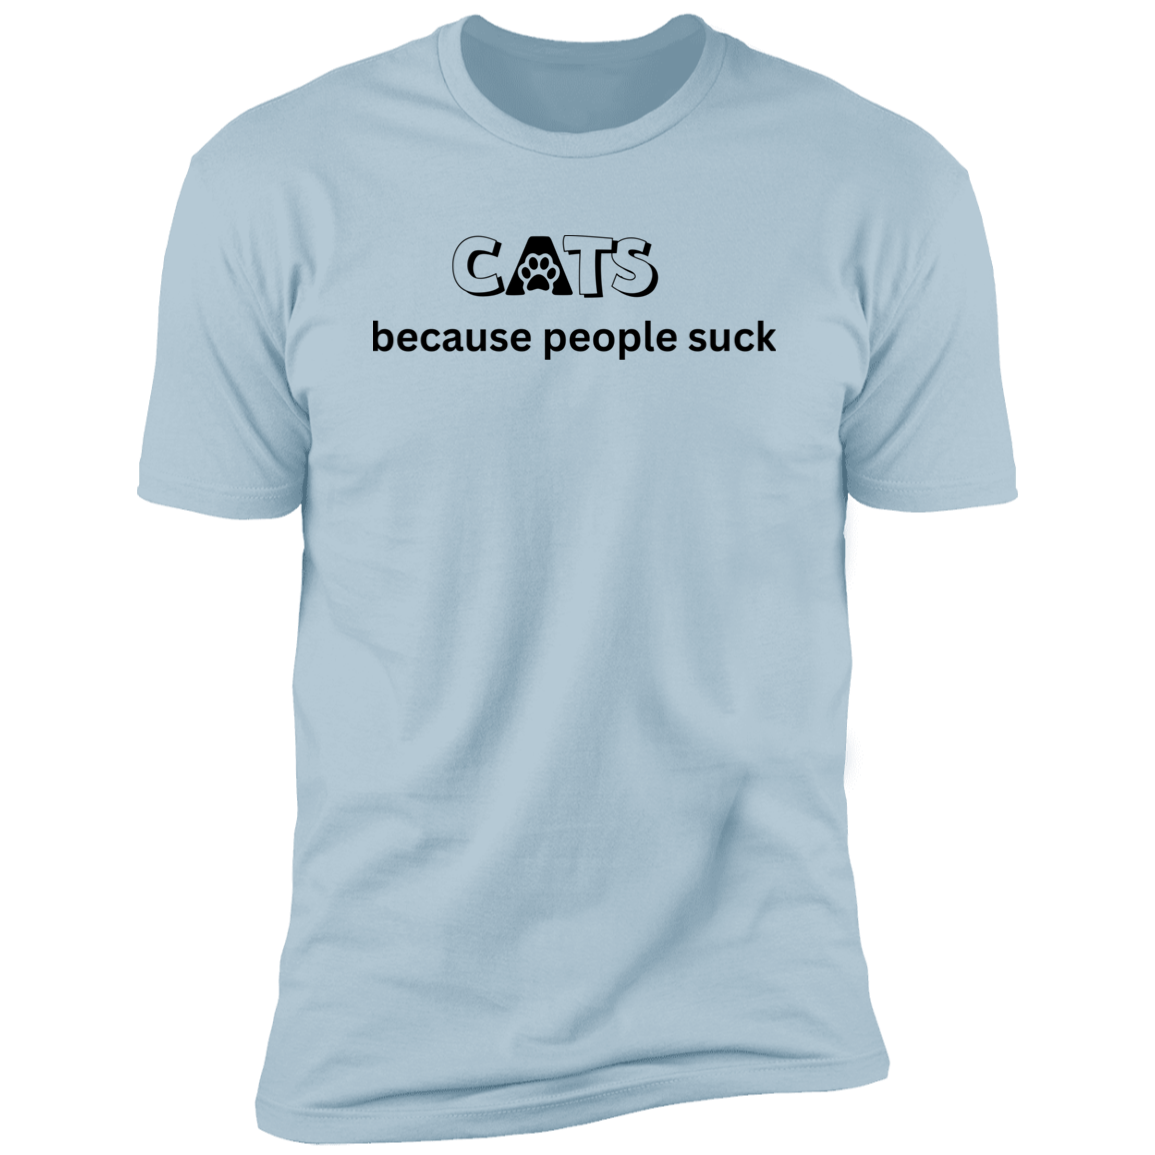 Cats Because People Suck T-shirt, Cat Shirt for humans, in light blue